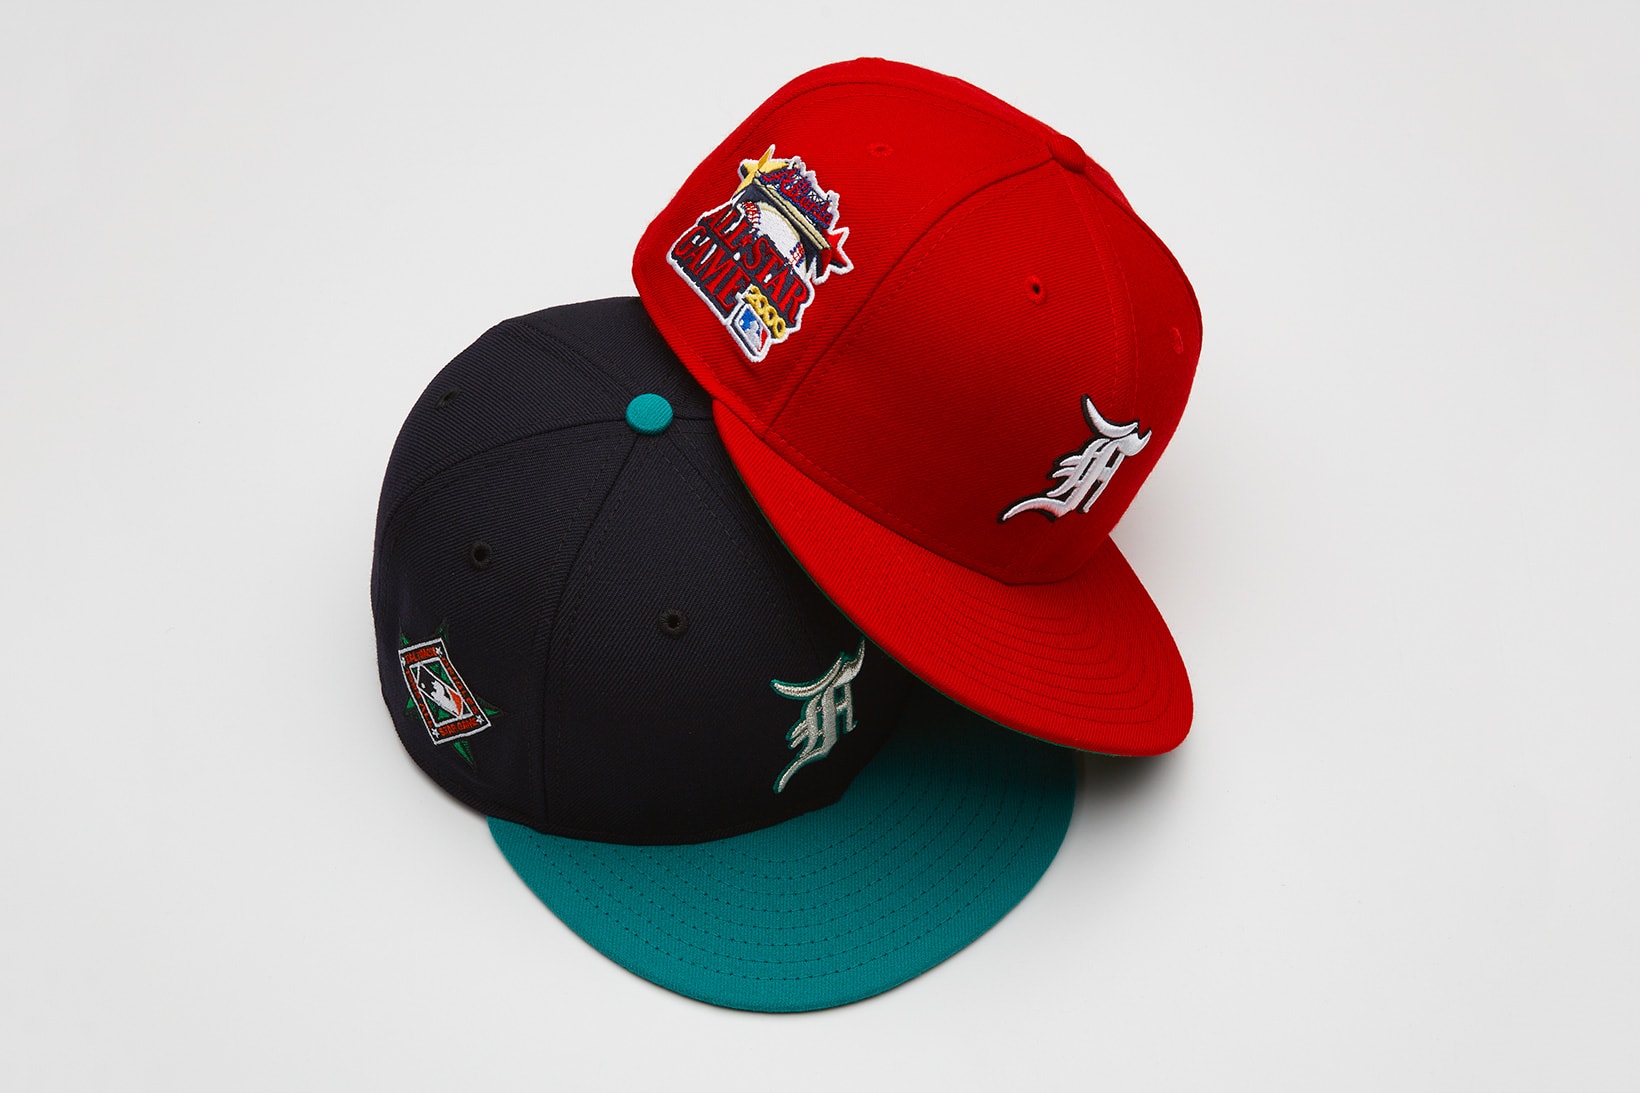 Fear of God MLB All Star New Era Cap Collection